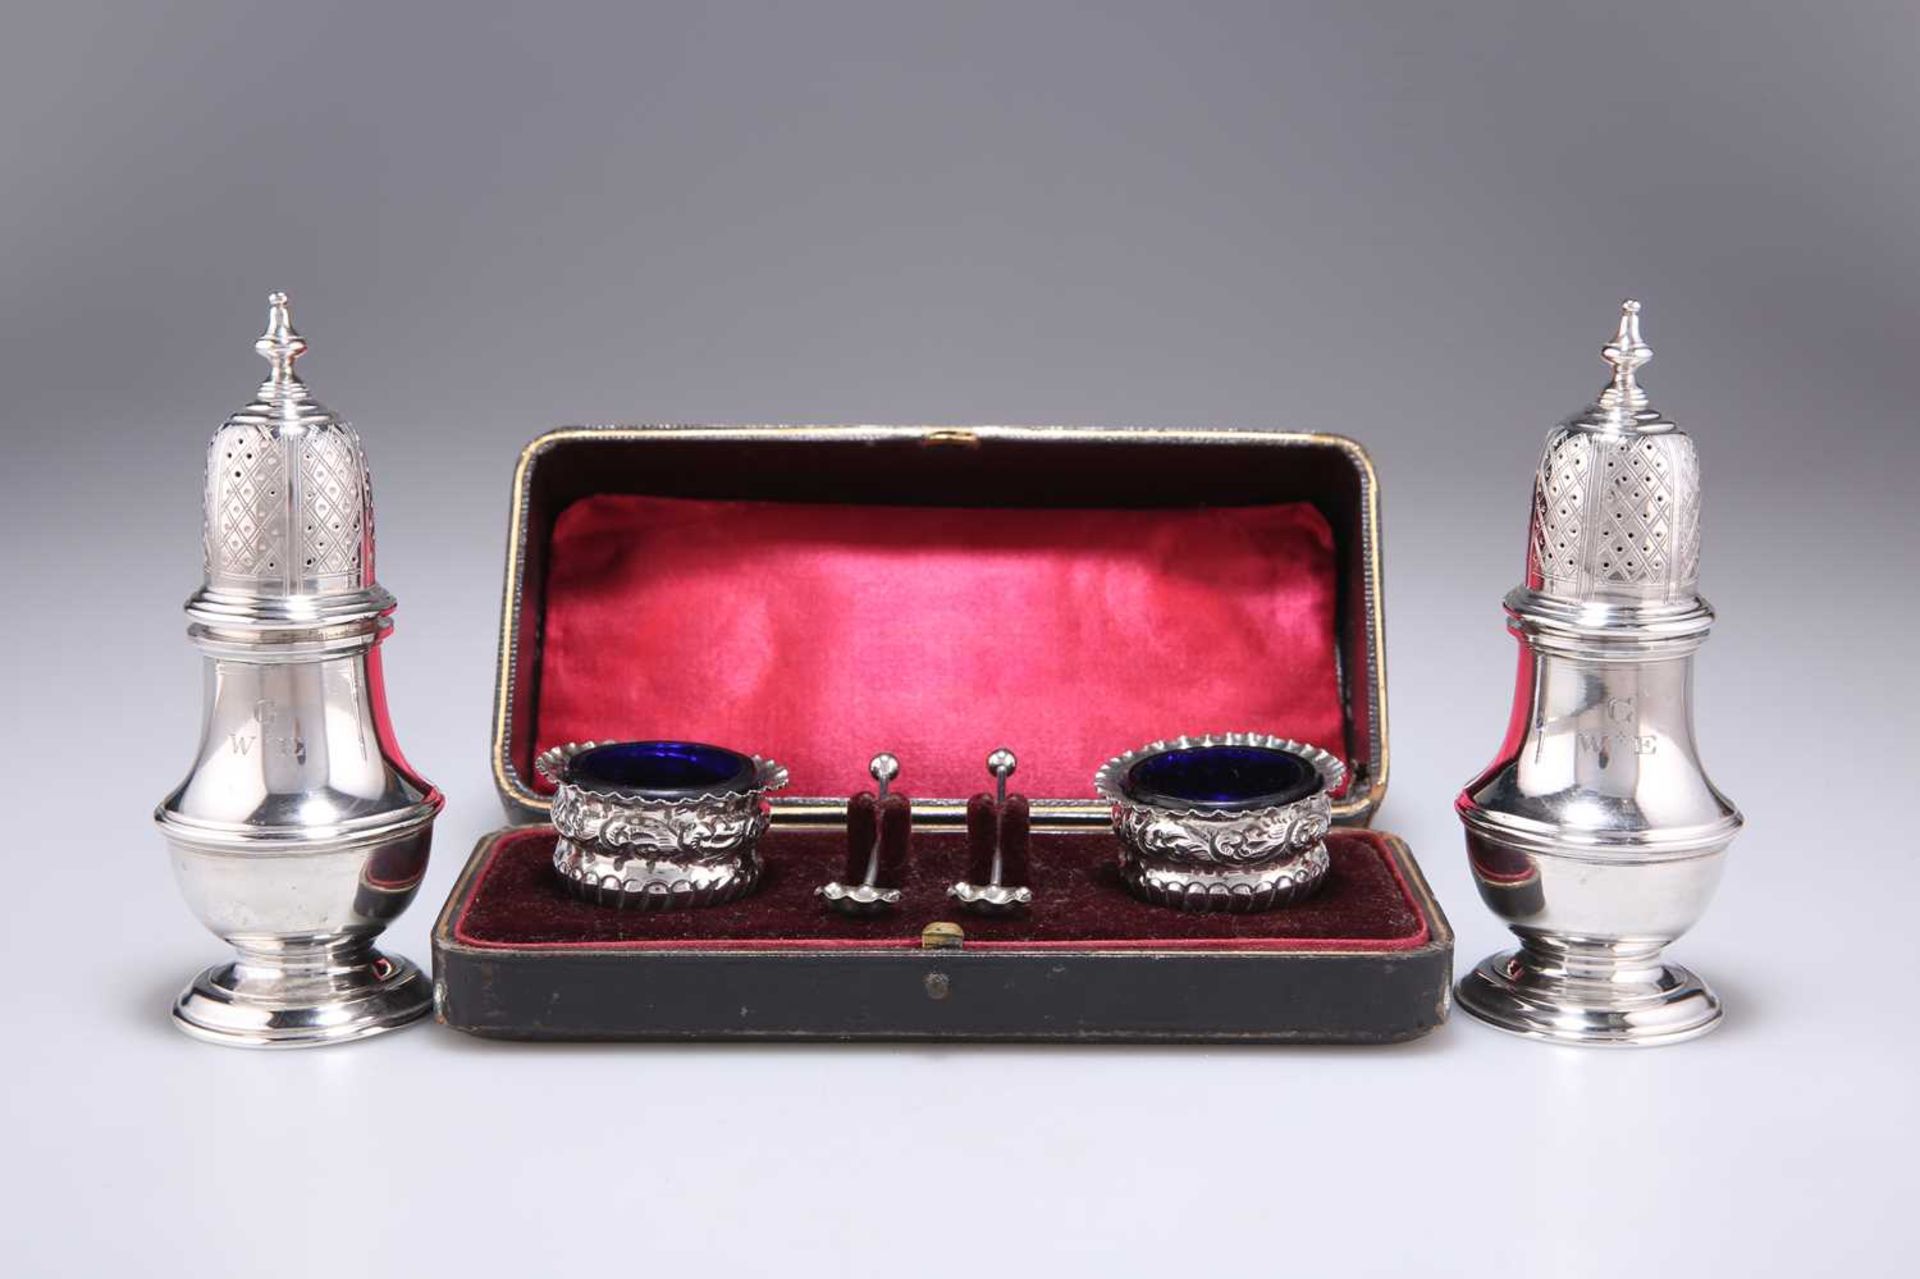 A PAIR OF LATE VICTORIAN SILVER SALTS, AND A PAIR OF LATE 19TH CENTURY AMERICAN SILVER CASTERS